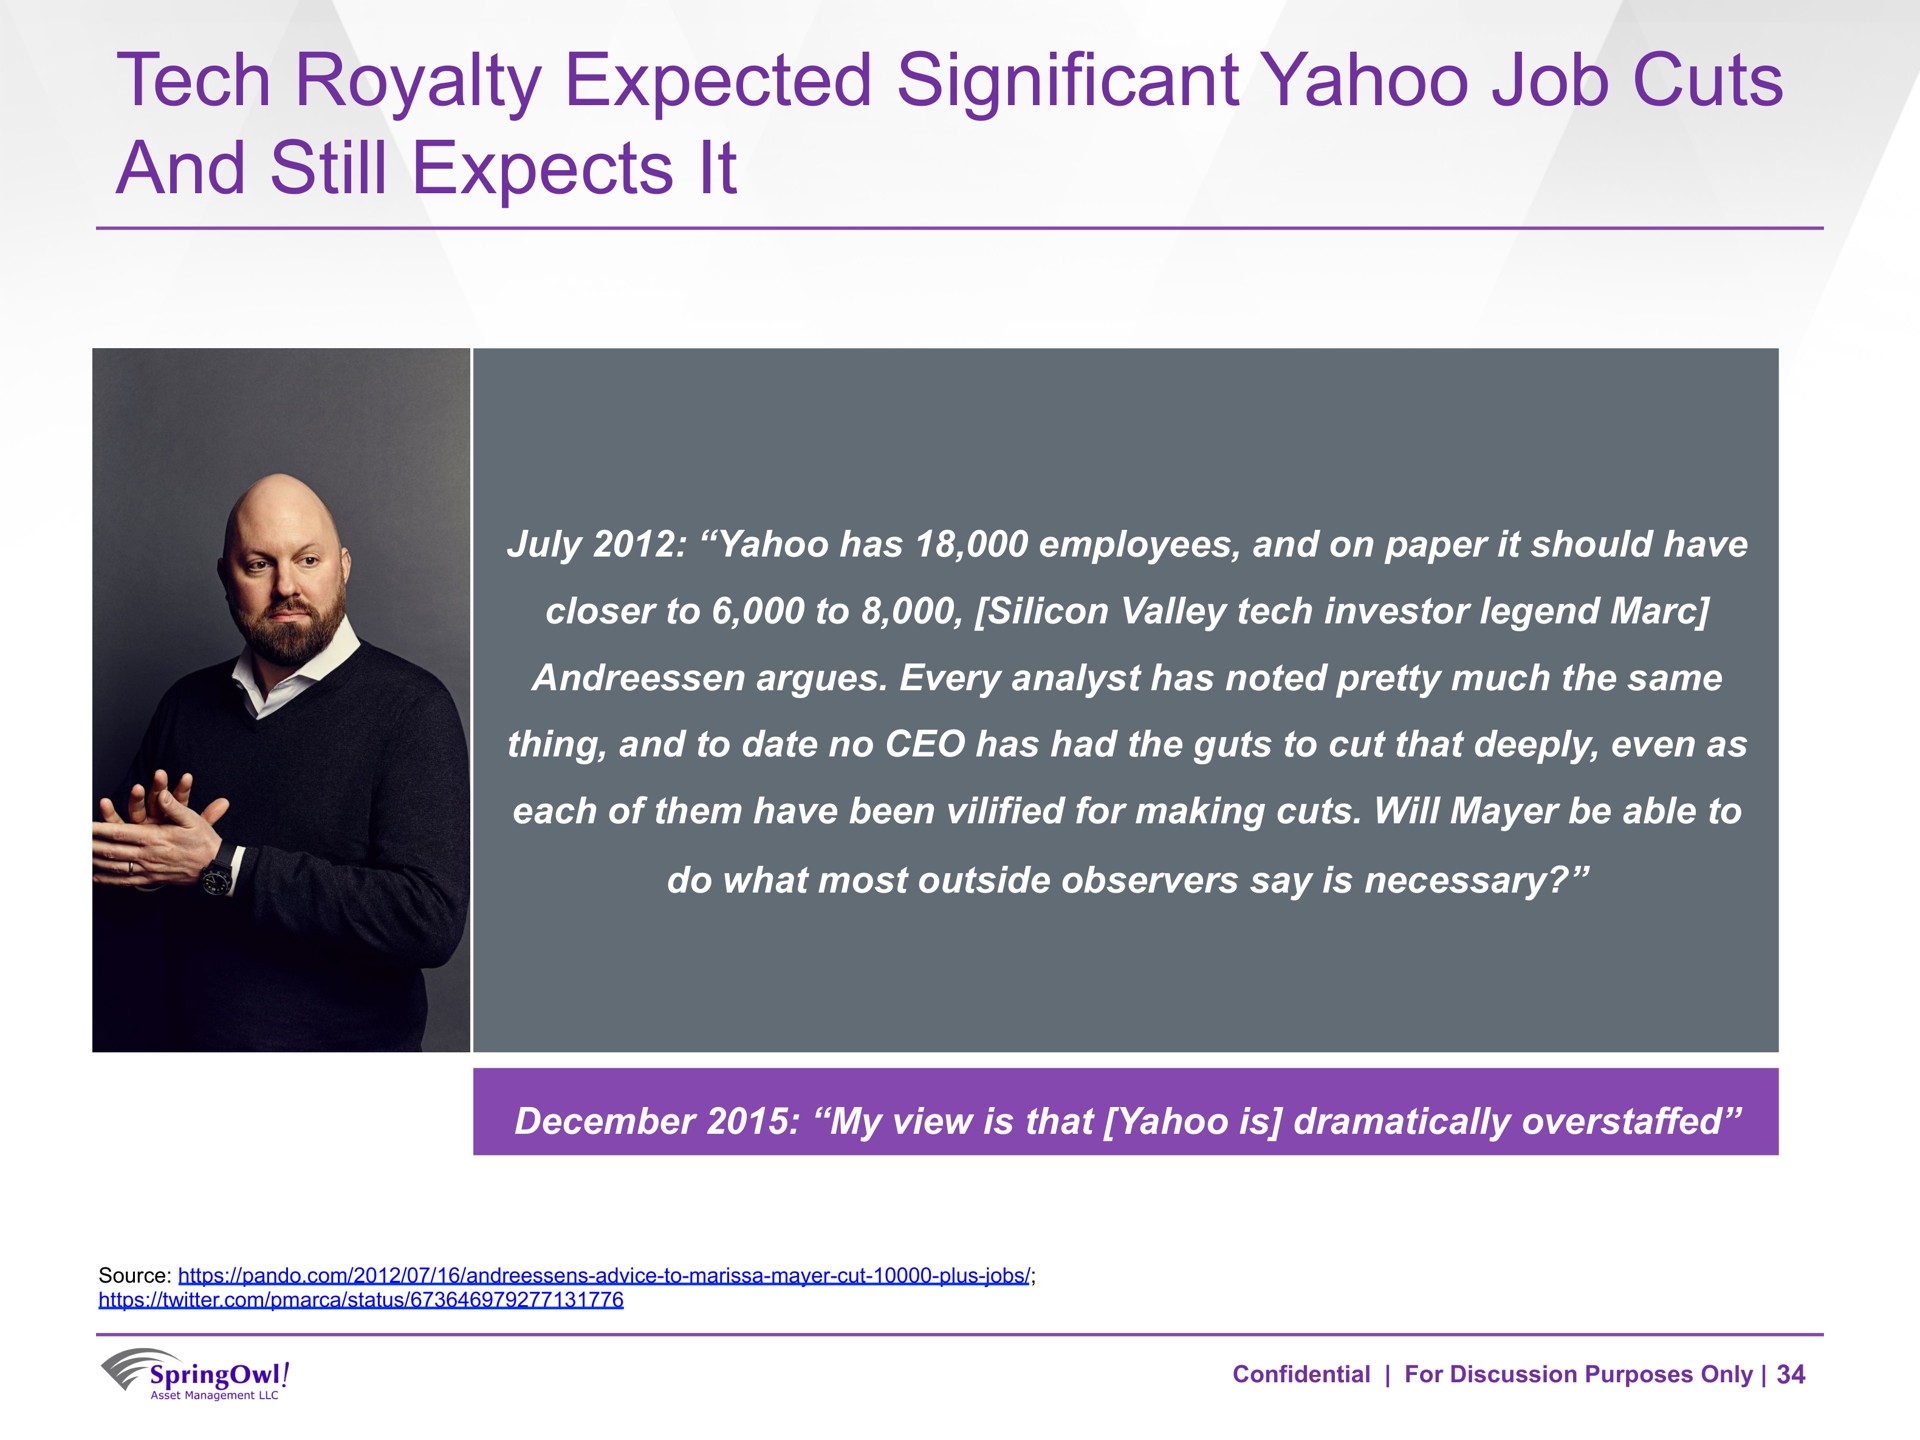 tech royalty expected significant yahoo job cuts and still expects it | SpringOwl